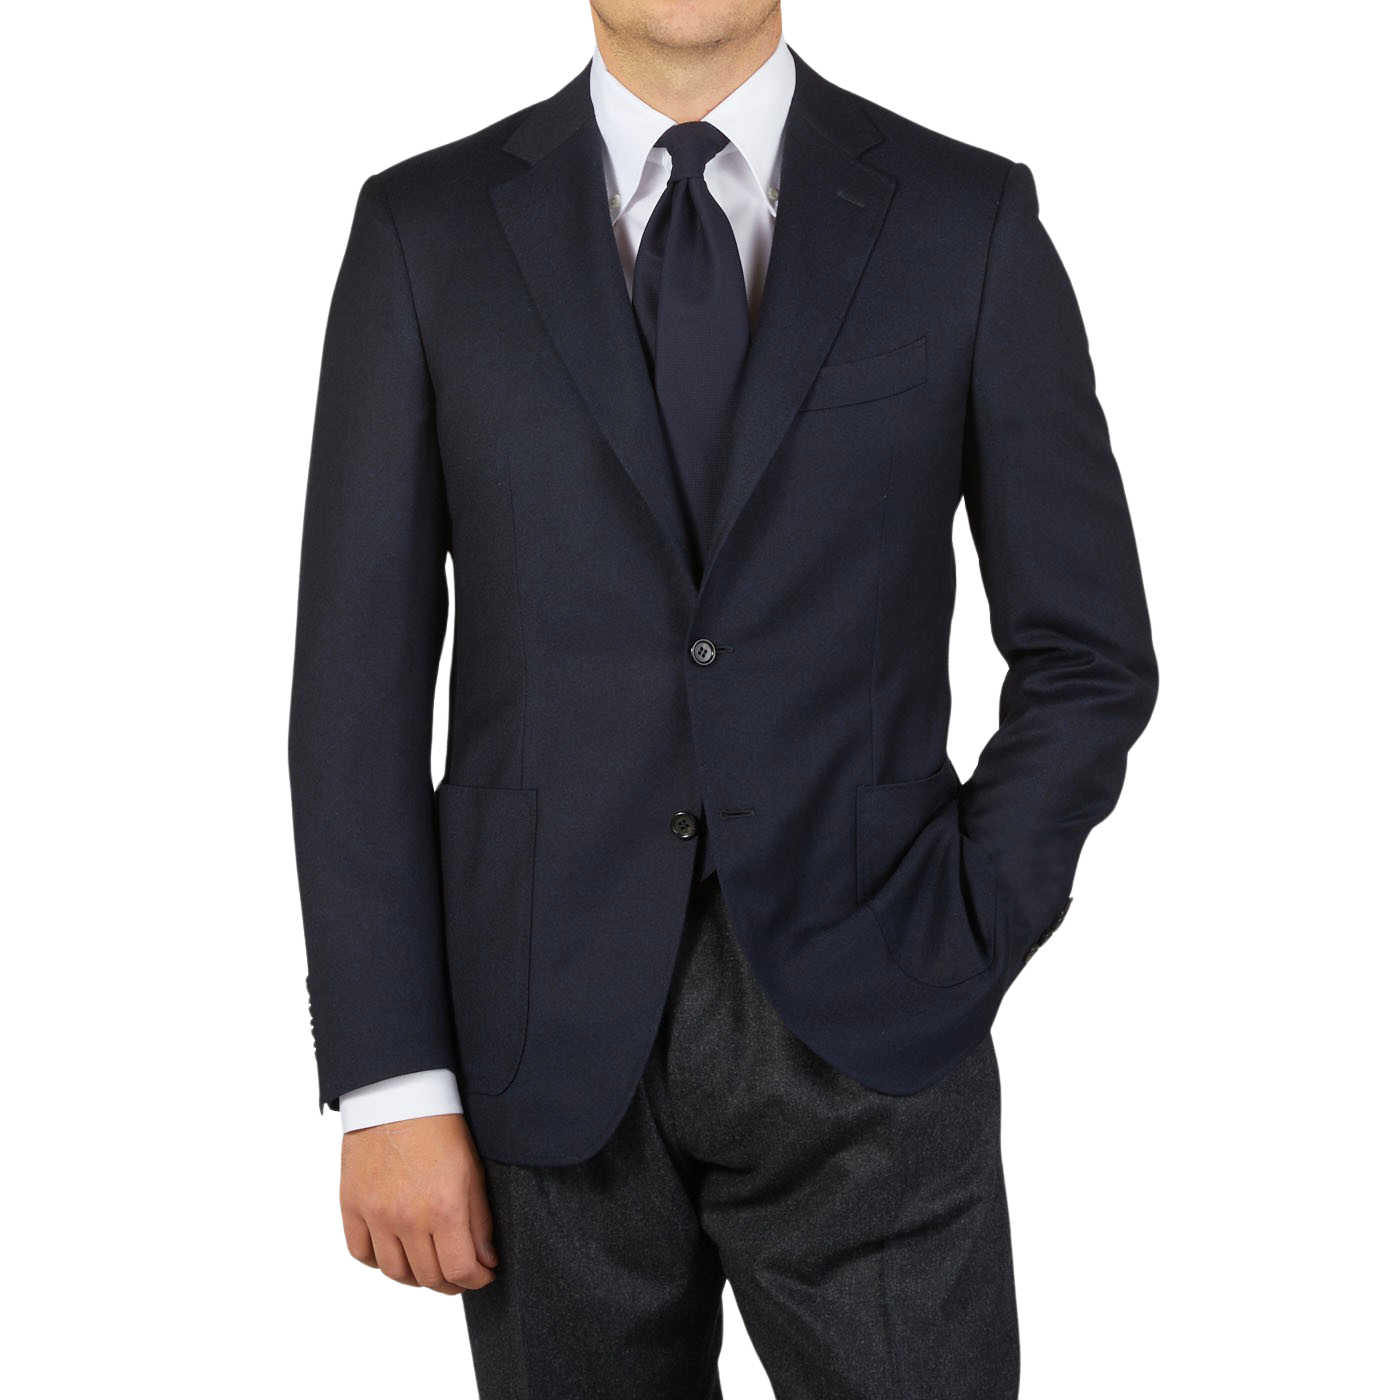 A man is posing for a photo in a Dreaming Of Monday Navy Blue 7-Fold Super 100s Wool Tie.